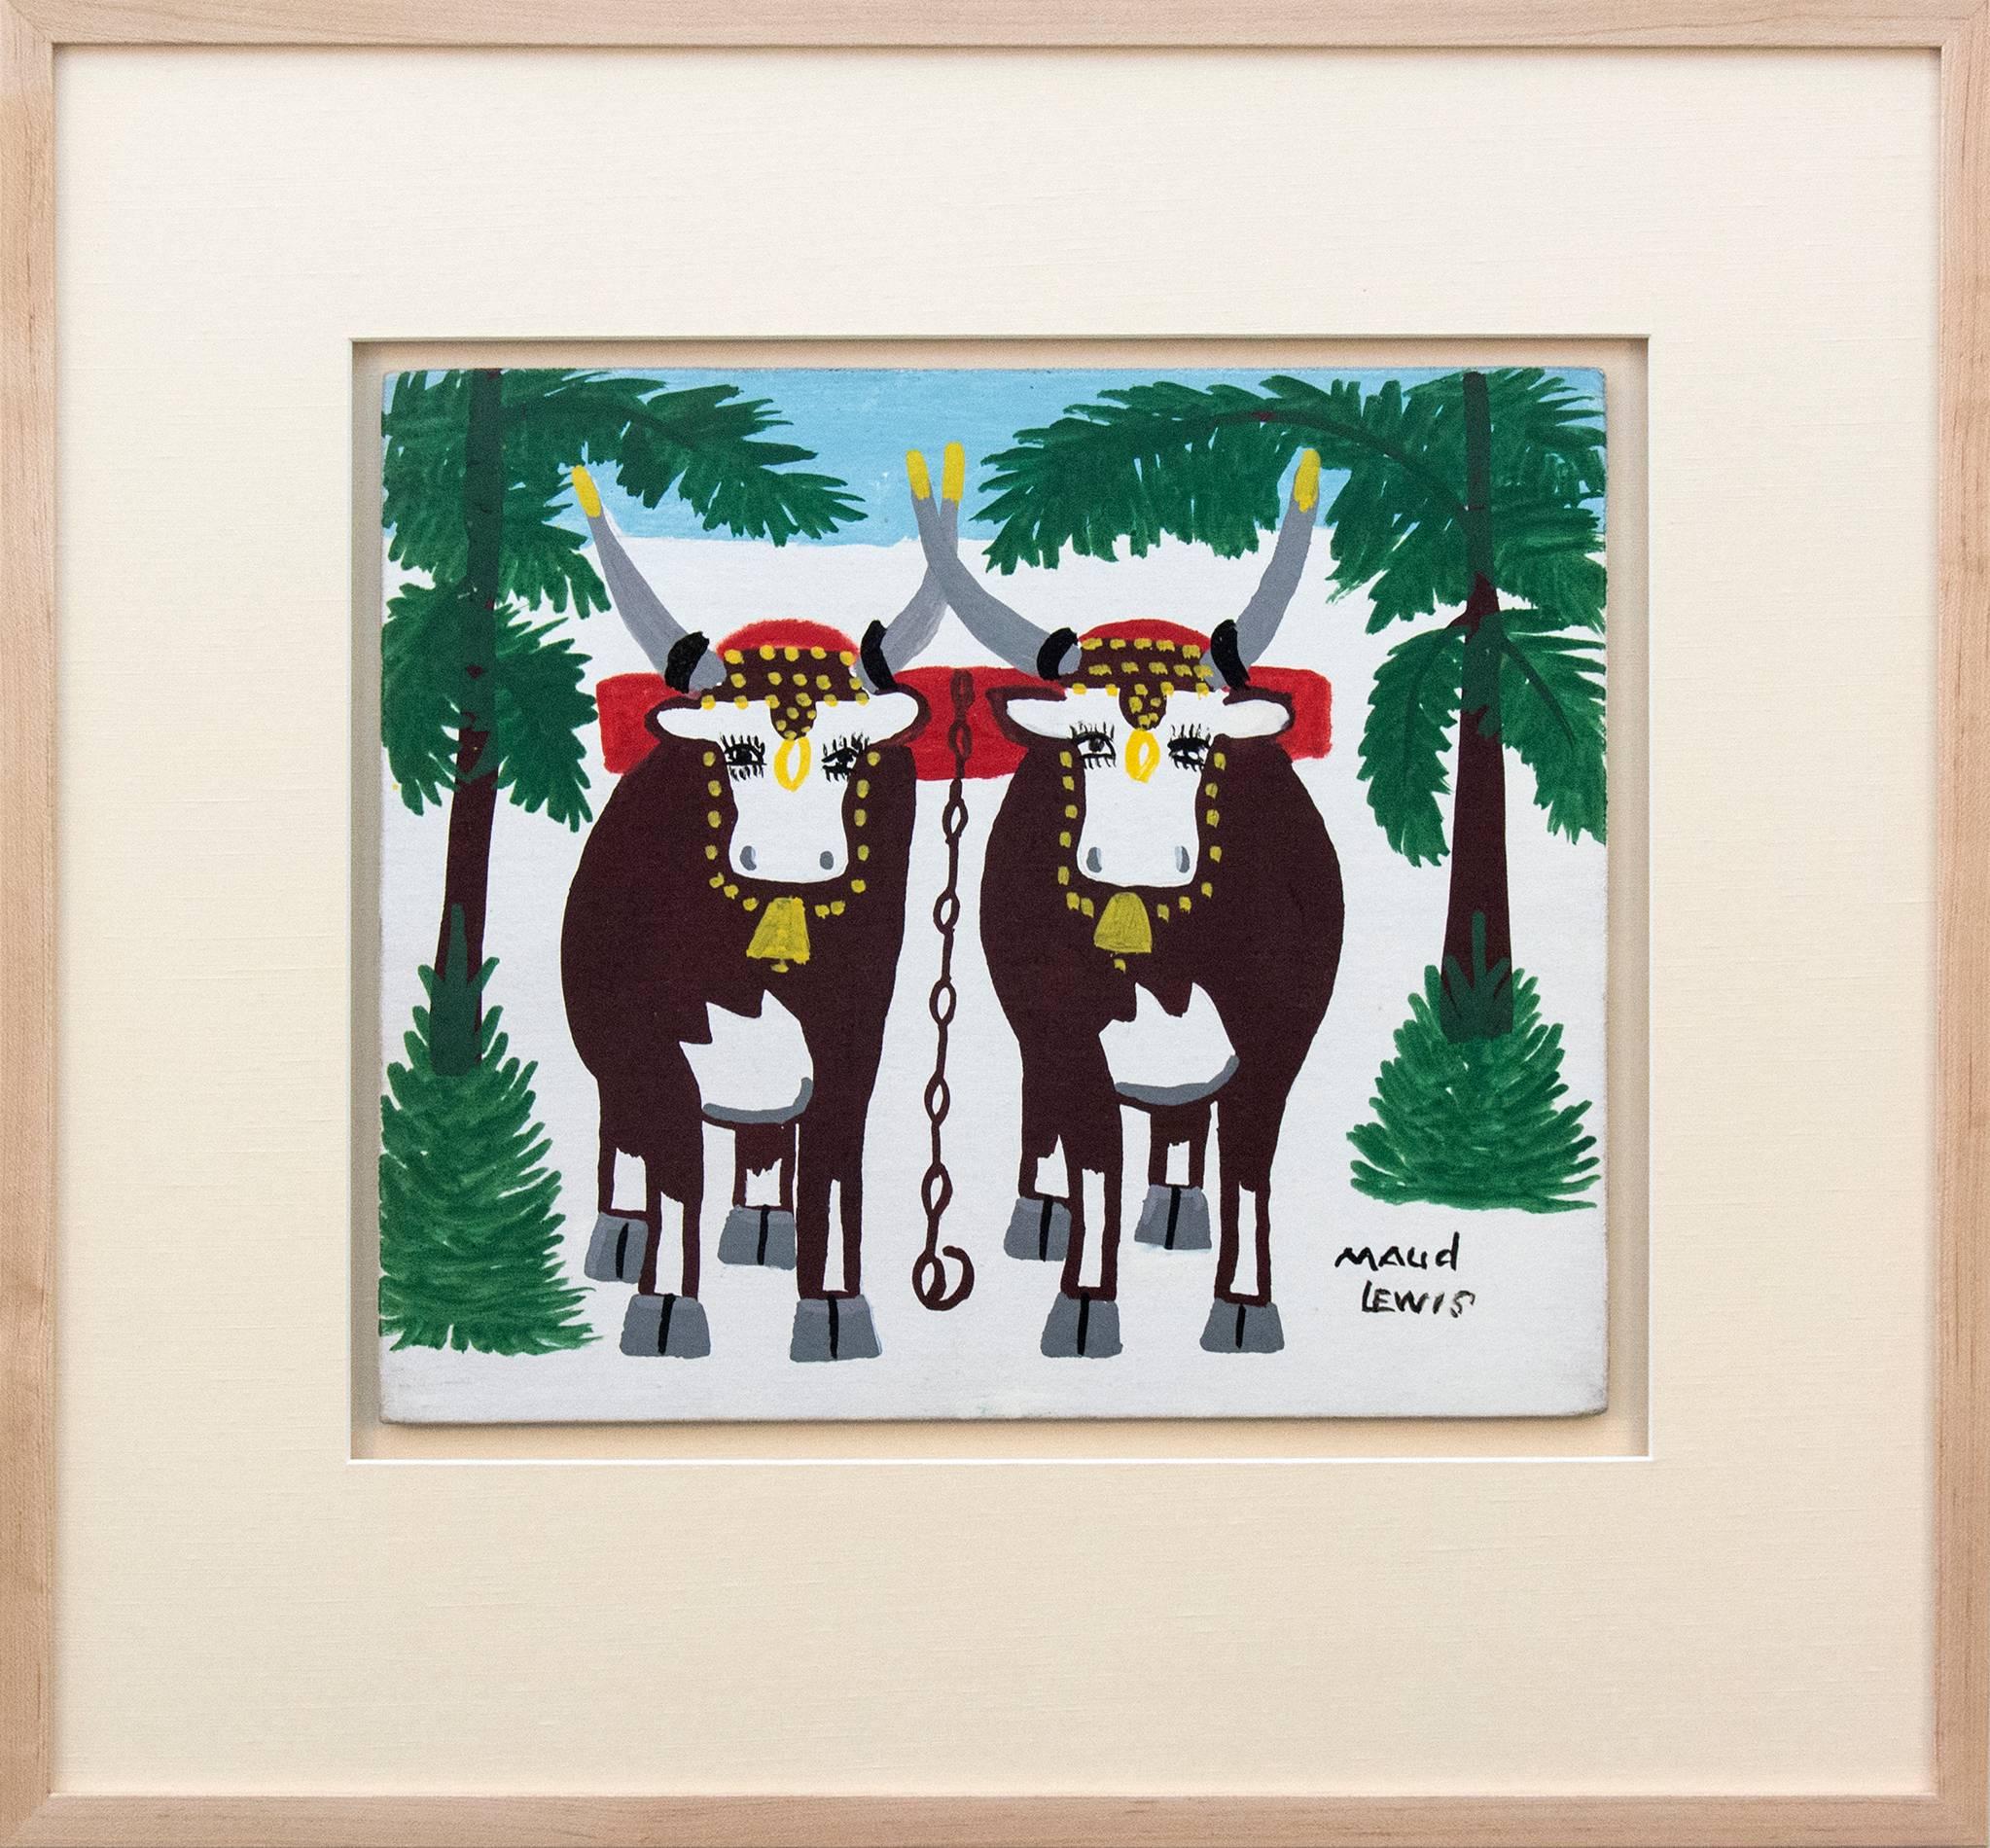 Pair of Oxen - Folk Art Painting by Maud Lewis